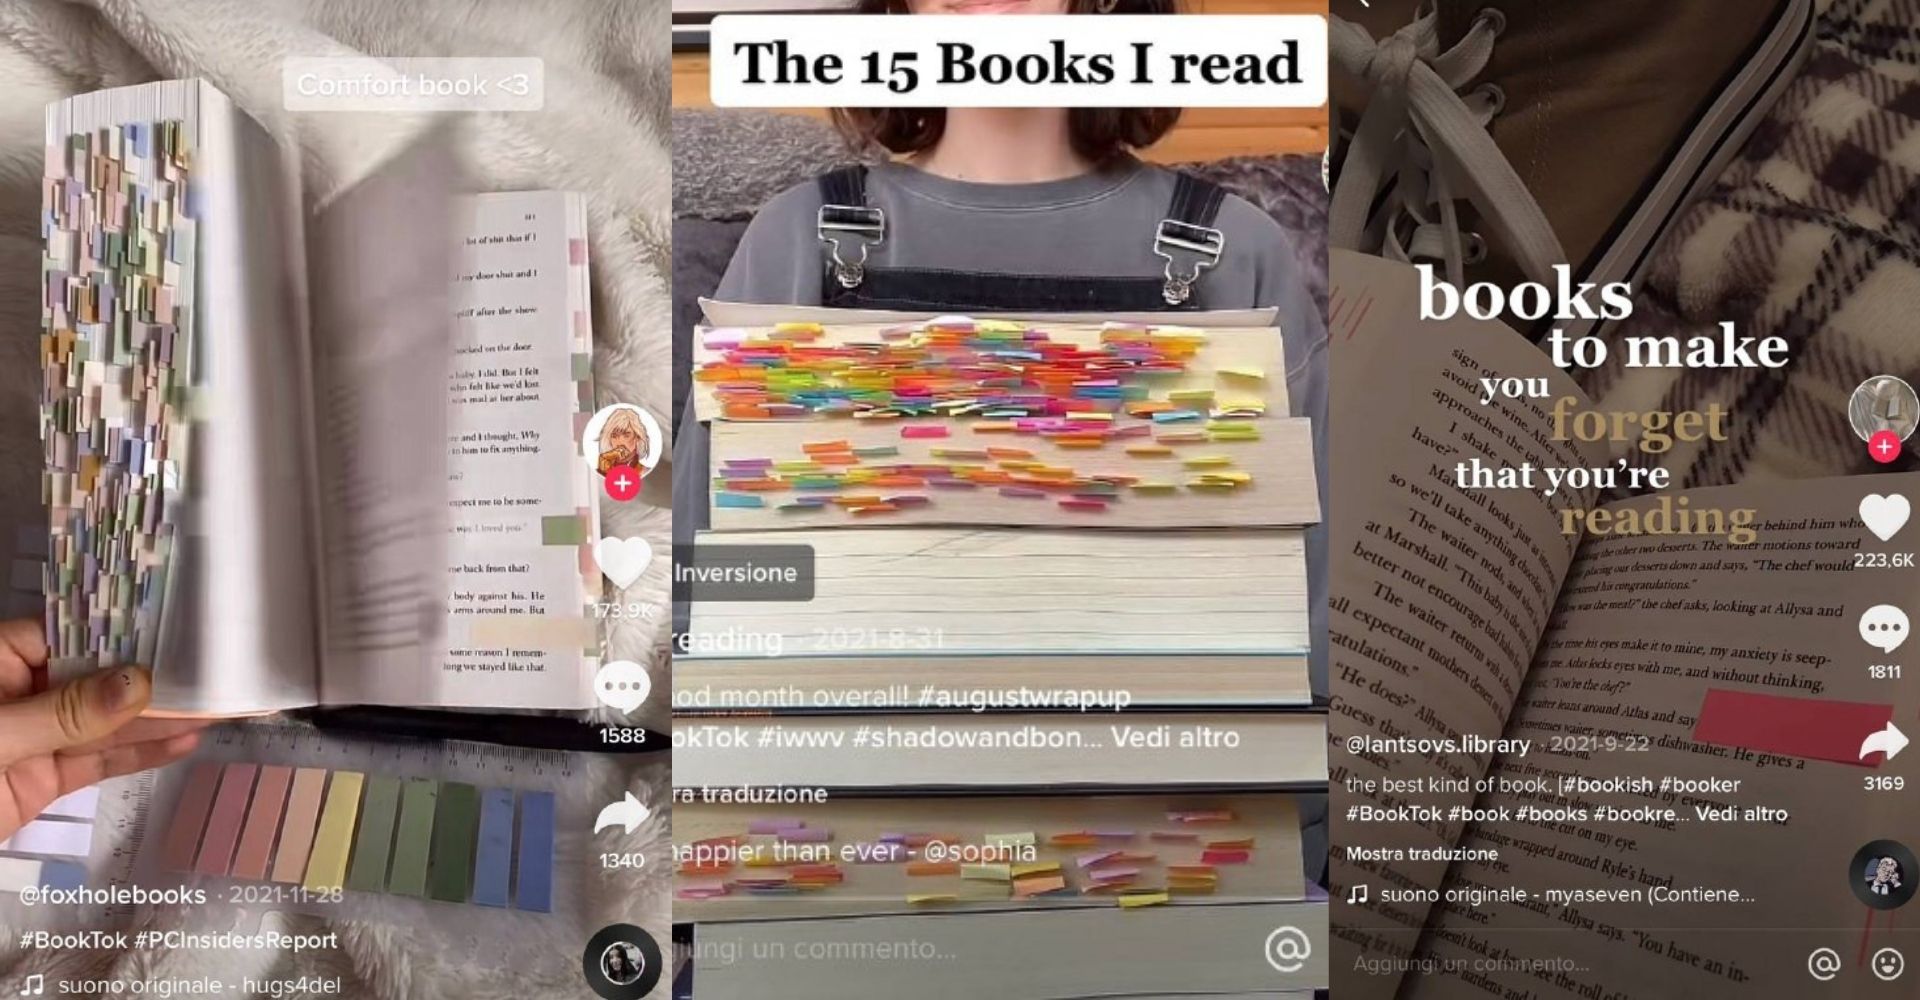 Post-its between novels: The new and colorful trend of Tik Tok